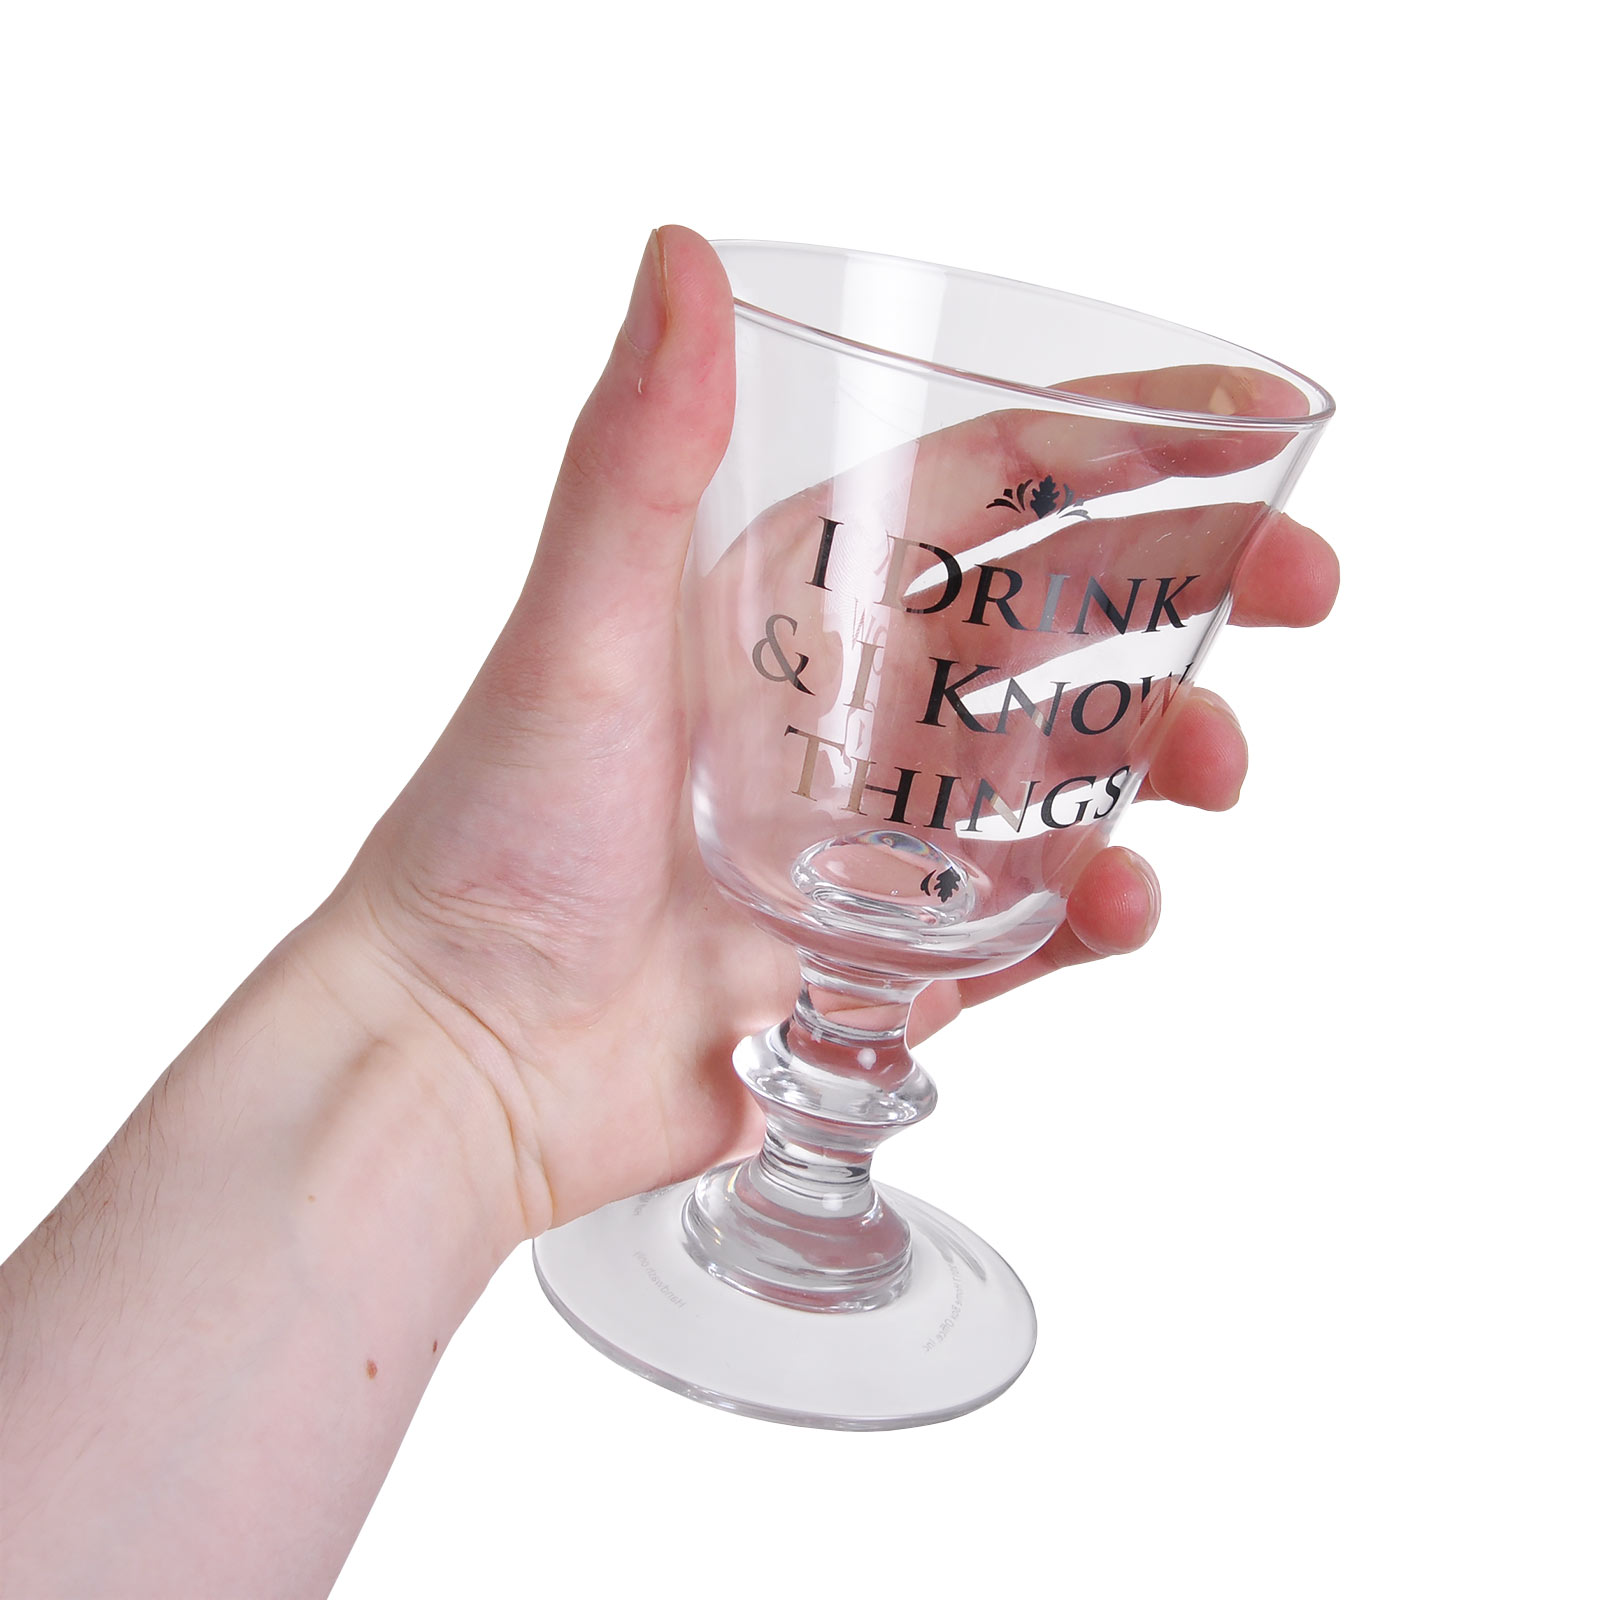 Game of Thrones - Verre à vin Drink and Know